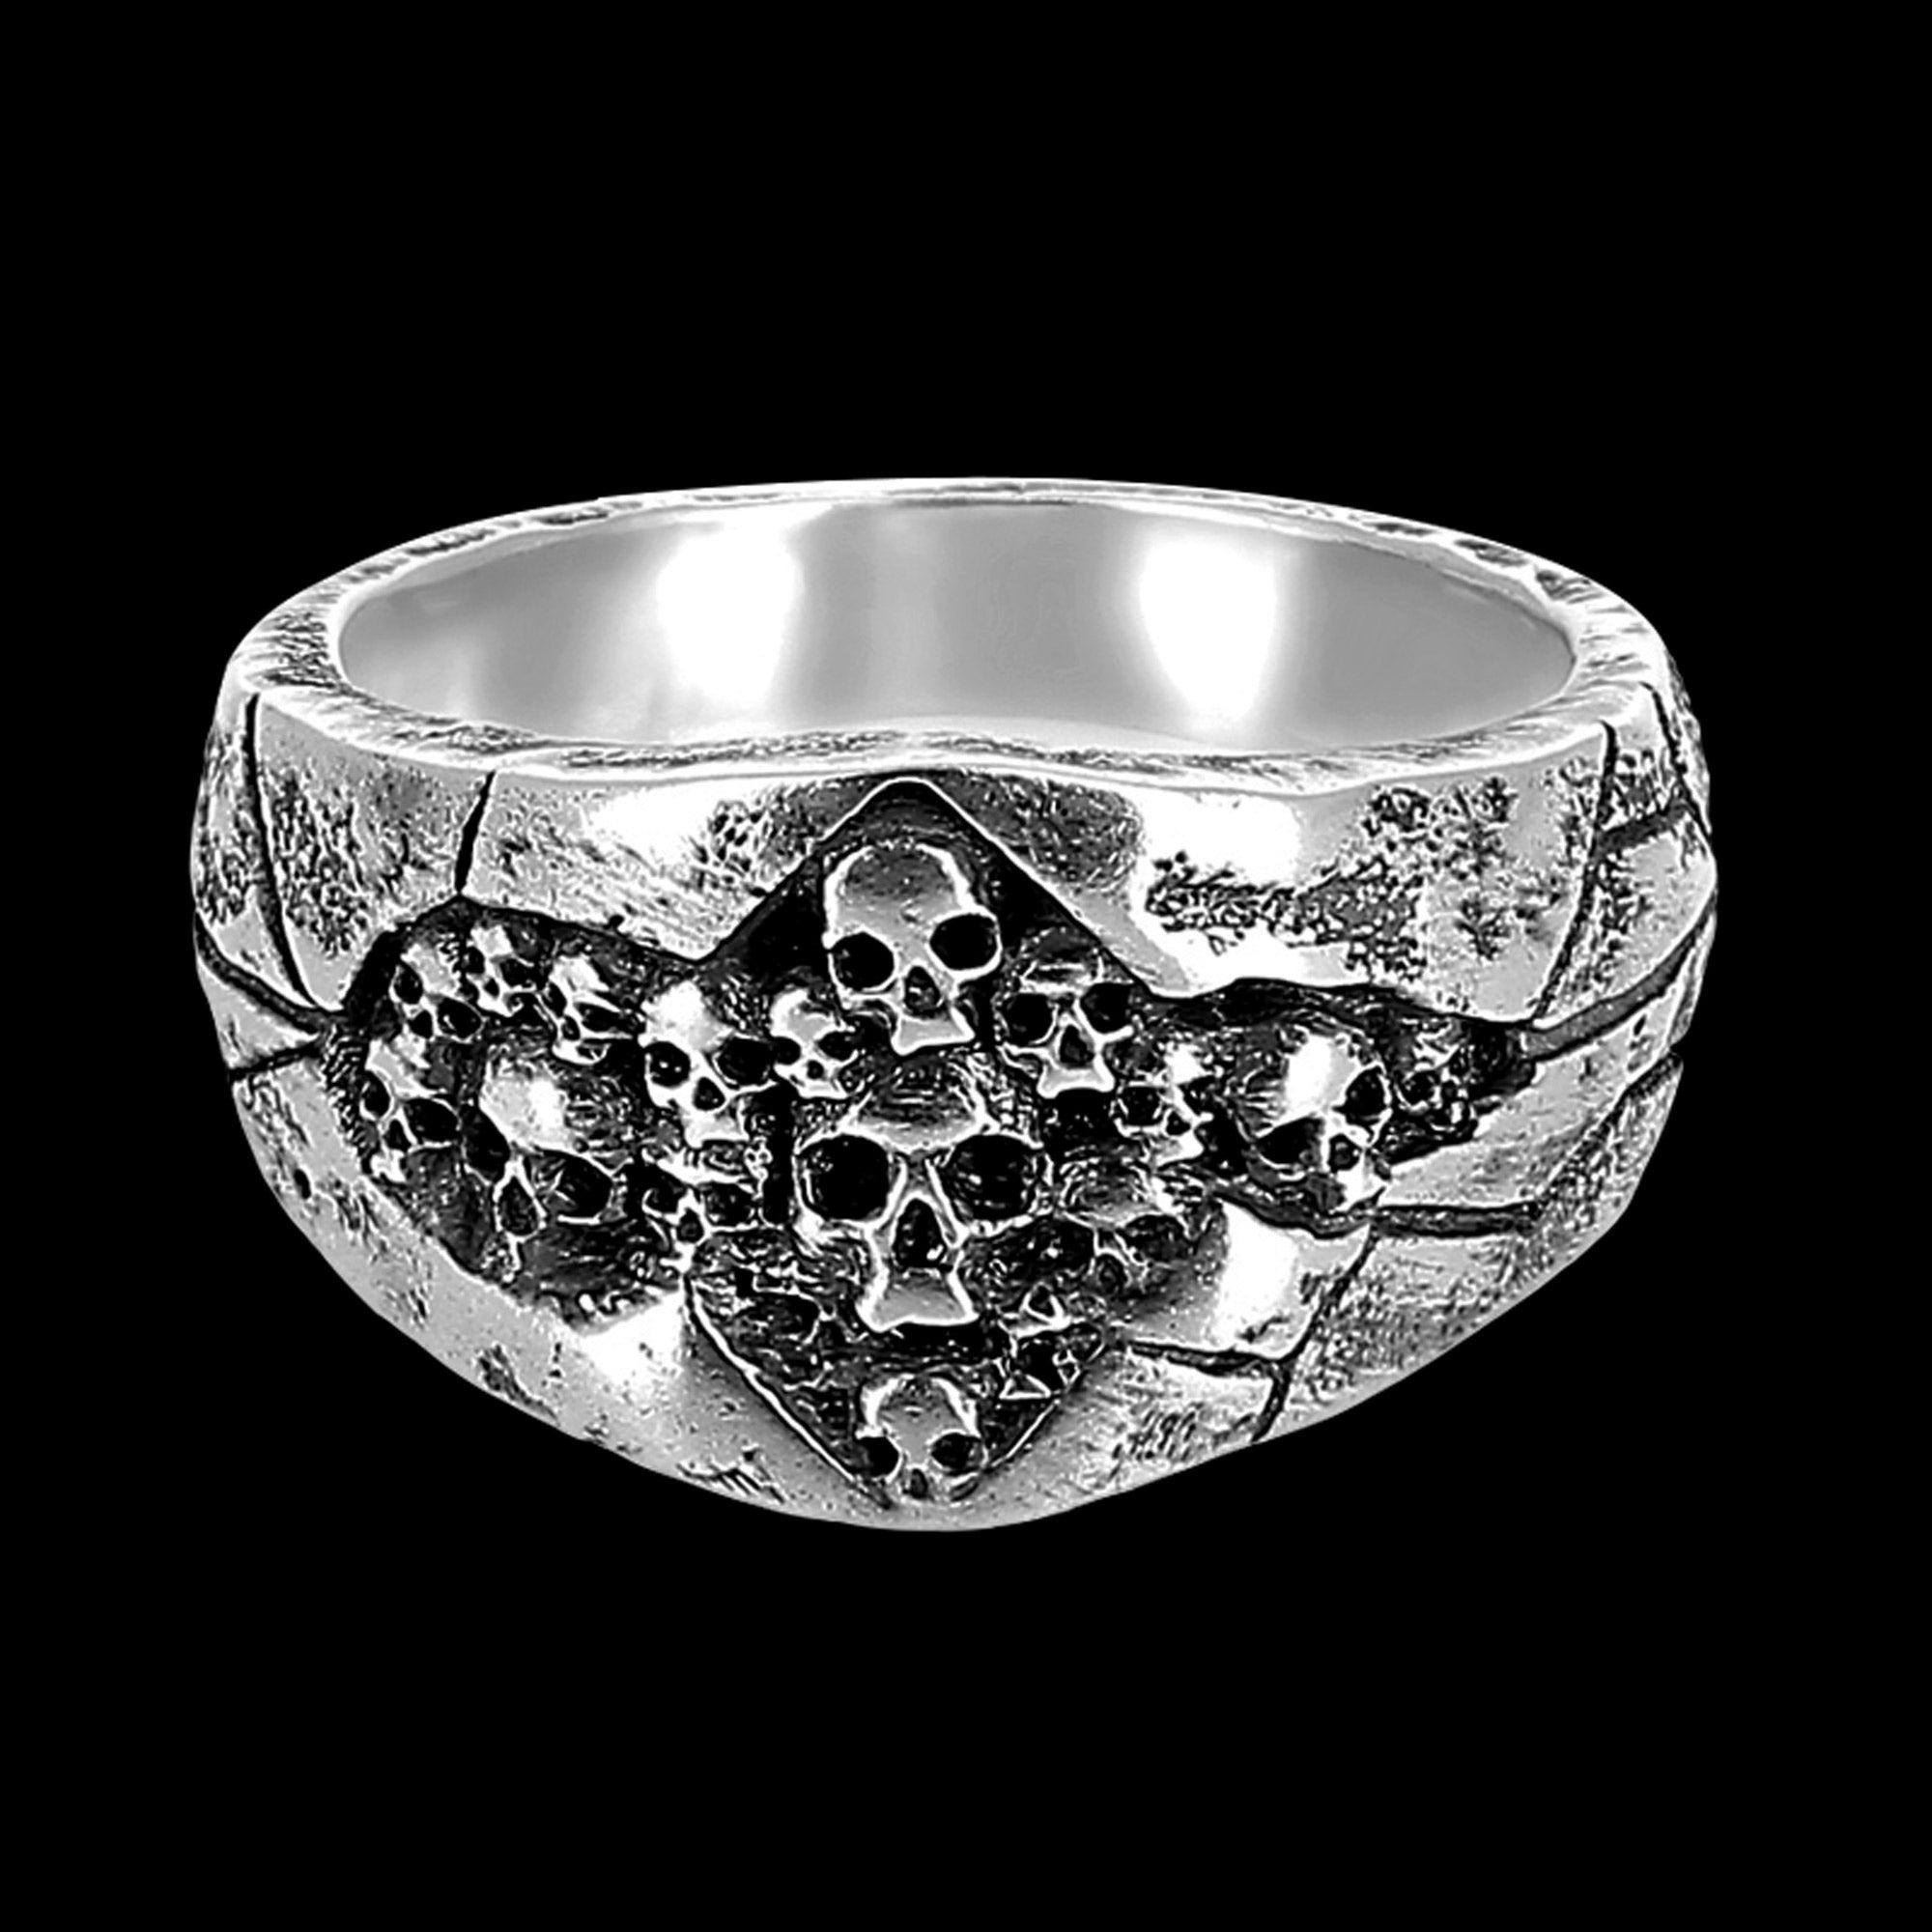 Ad Petram - Sterling Silver Ring with skulls